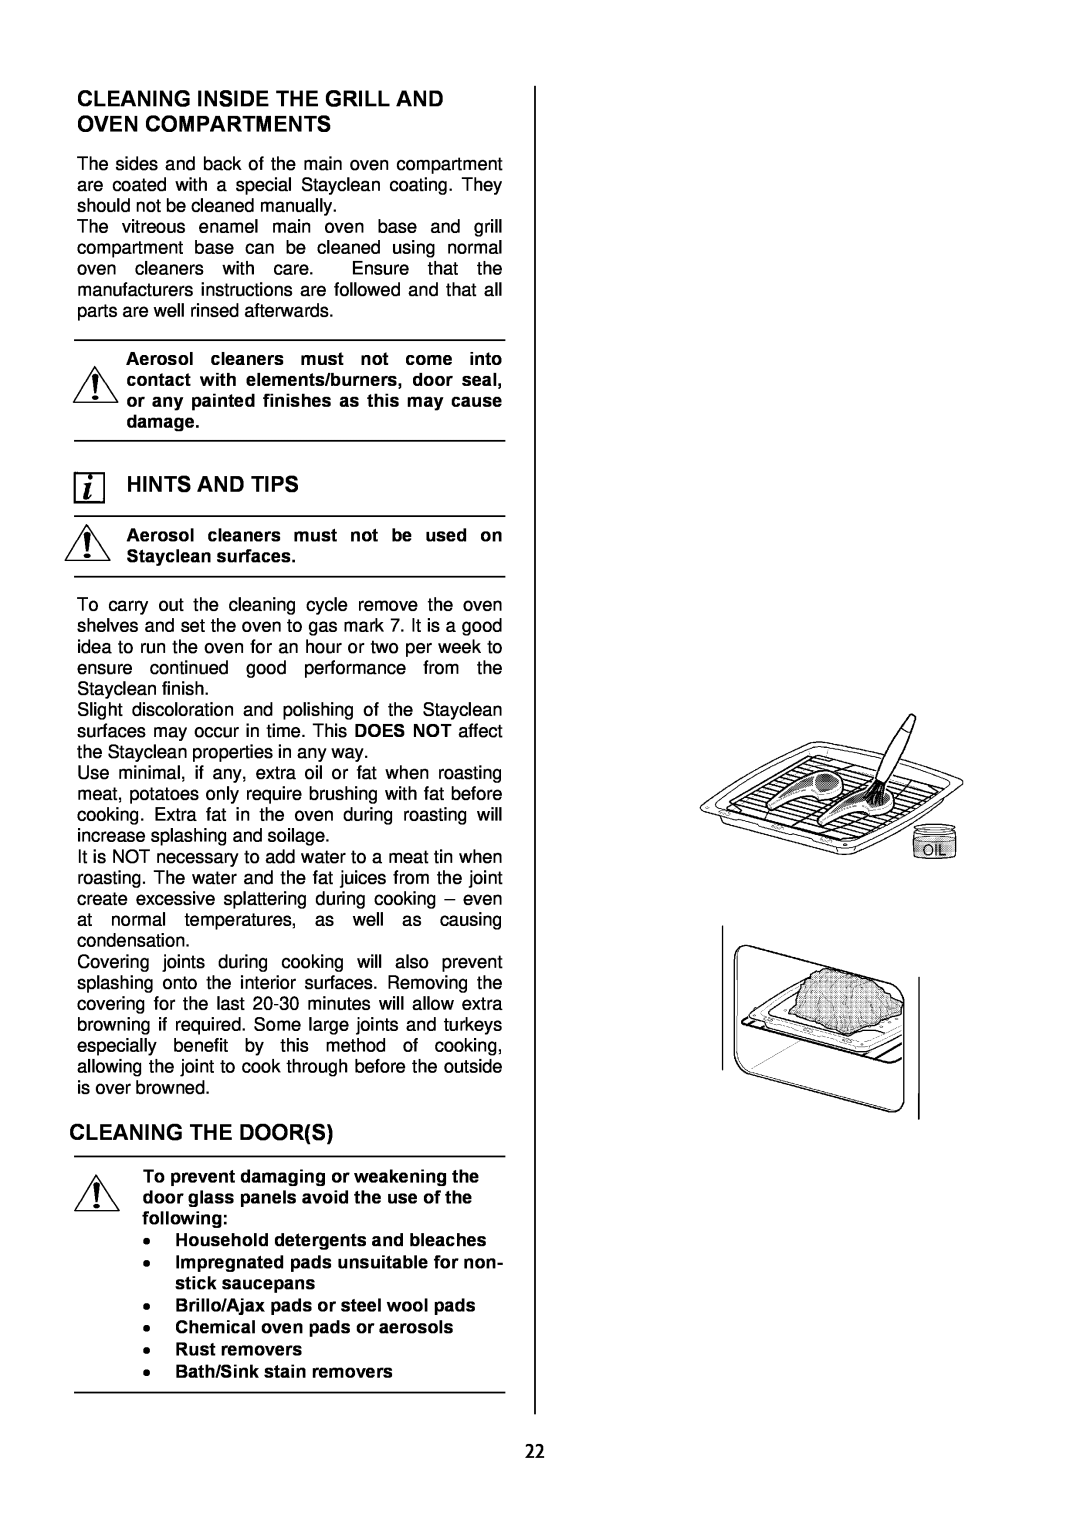 Electrolux EKG5047, EKG5046 manual Cleaning Inside The Grill And Oven Compartments, Cleaning The Doors, Hints And Tips 